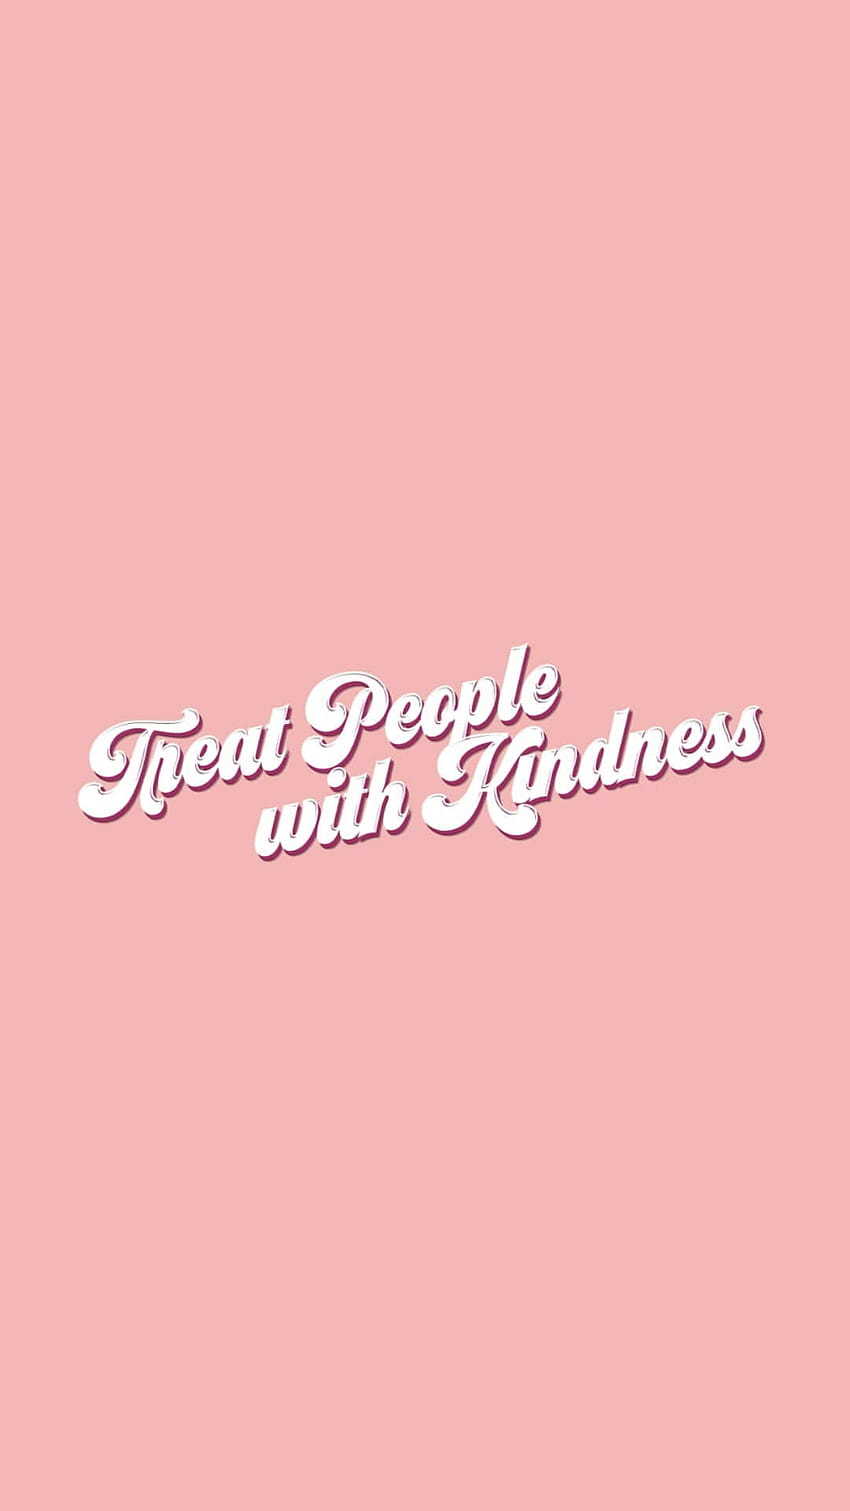 treat people with kindness quote lockscreen HD phone wallpaper